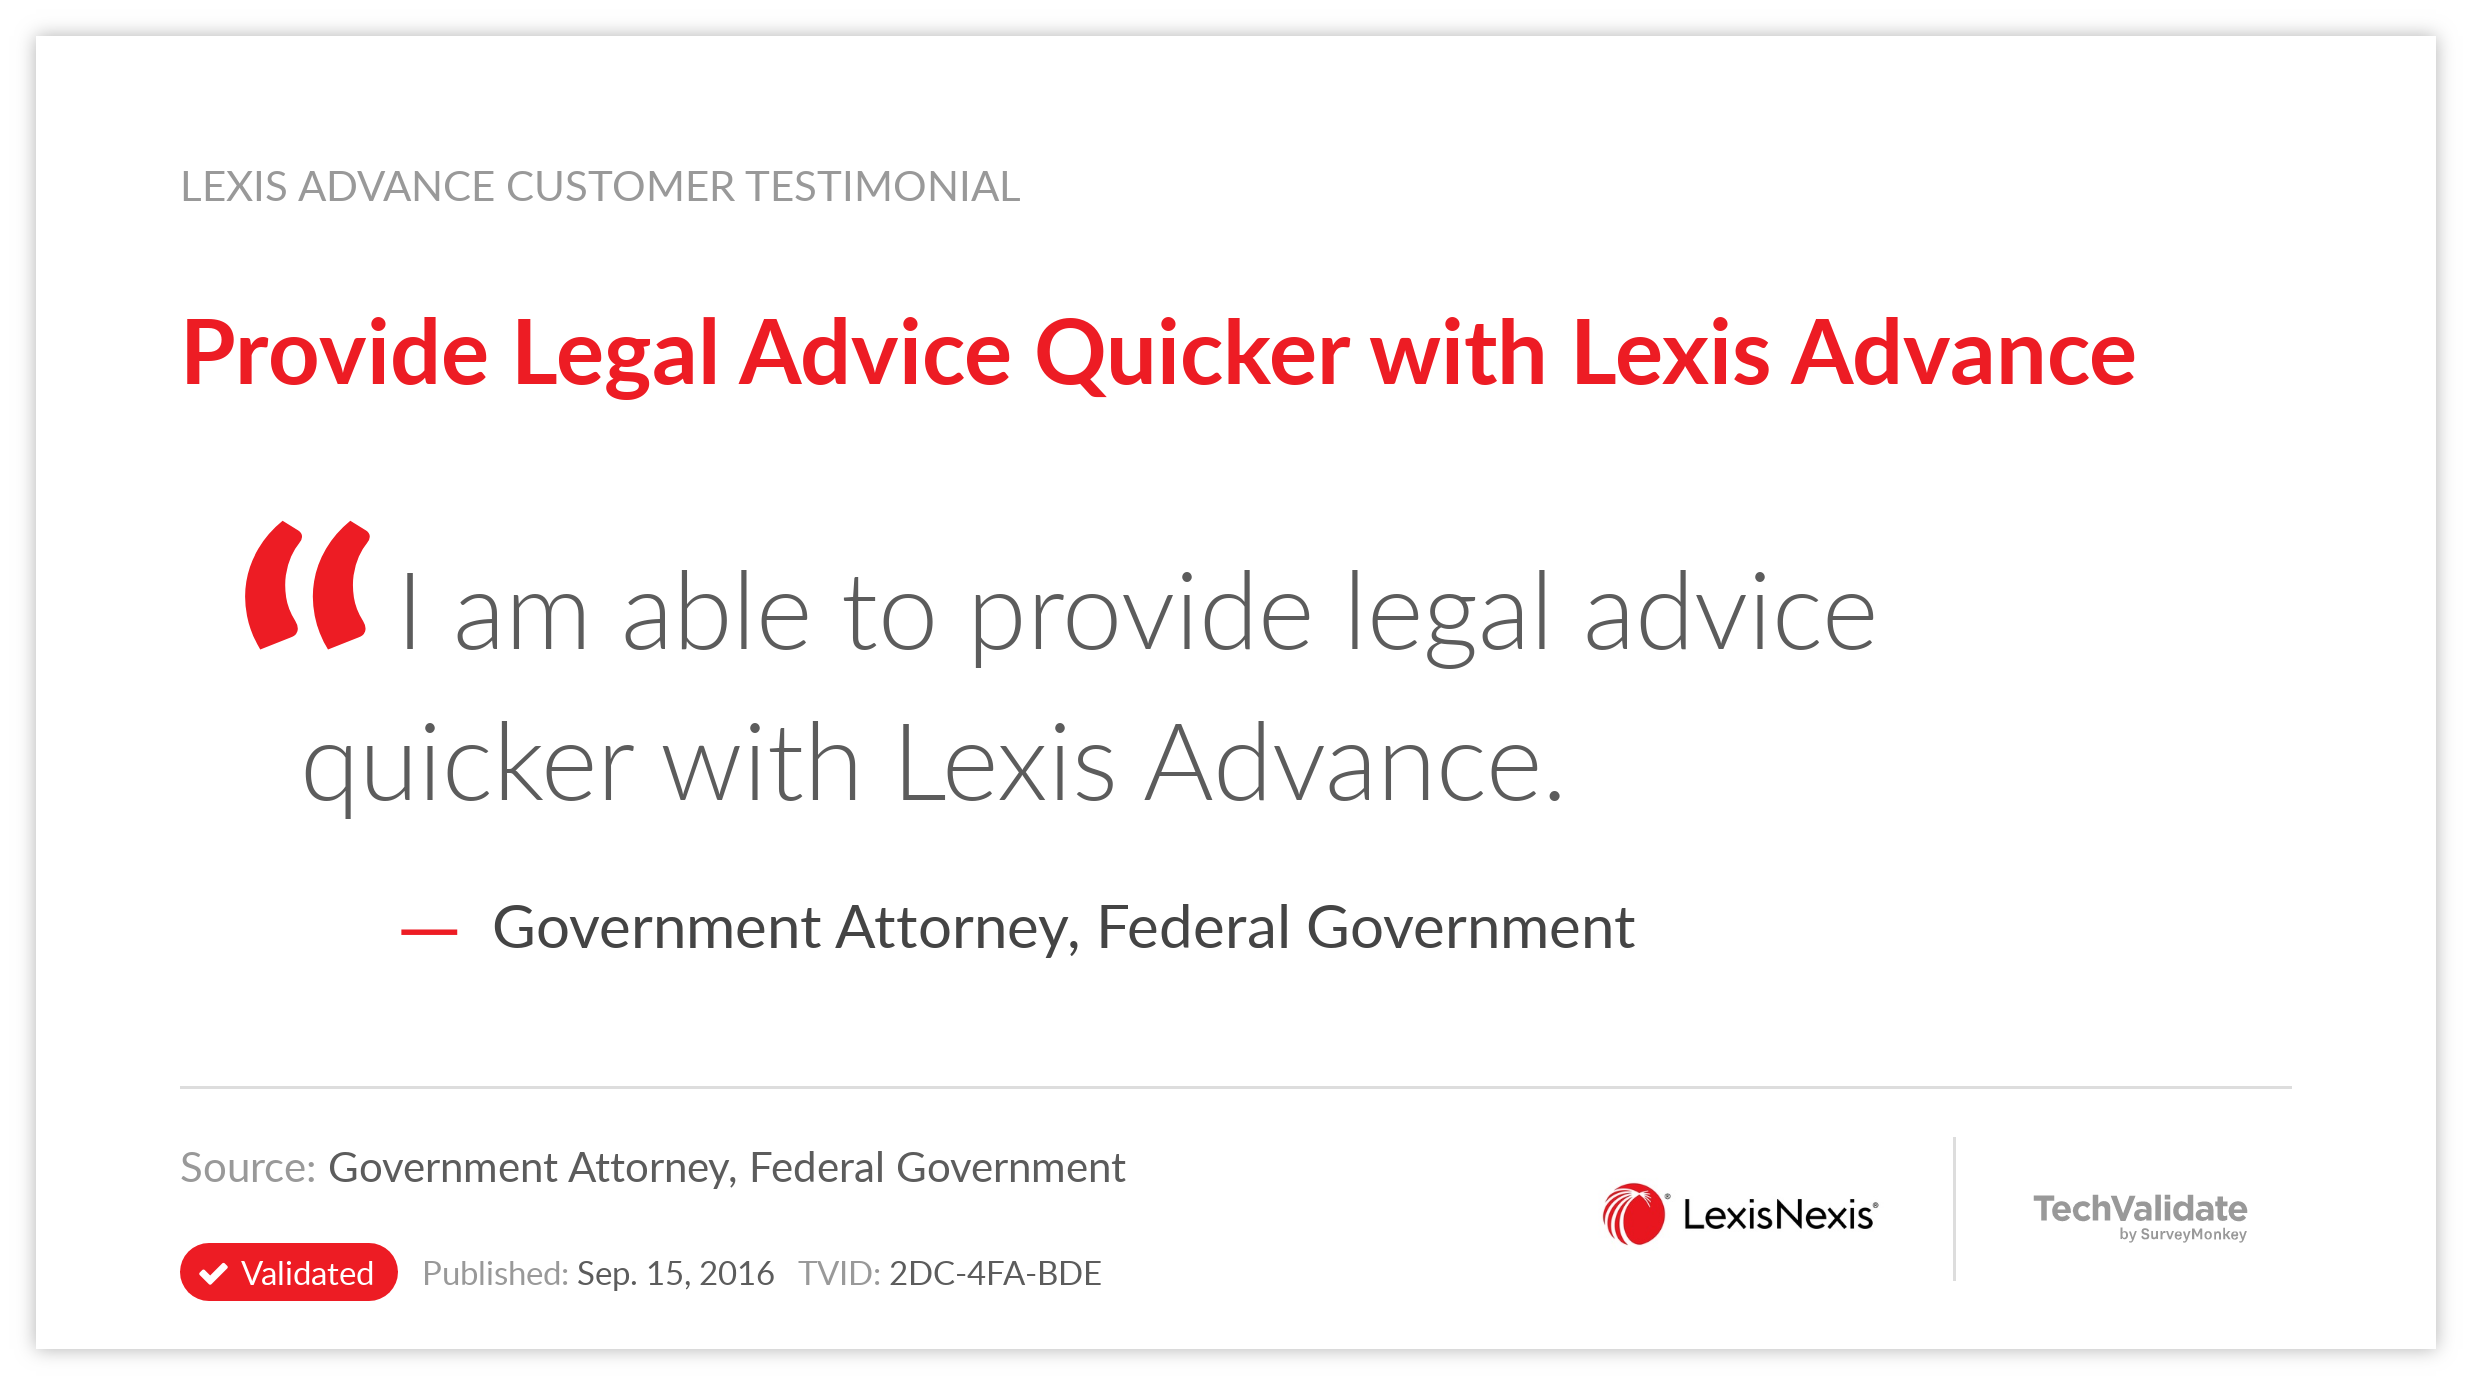 Provide Legal Advice Quicker with Lexis Advance